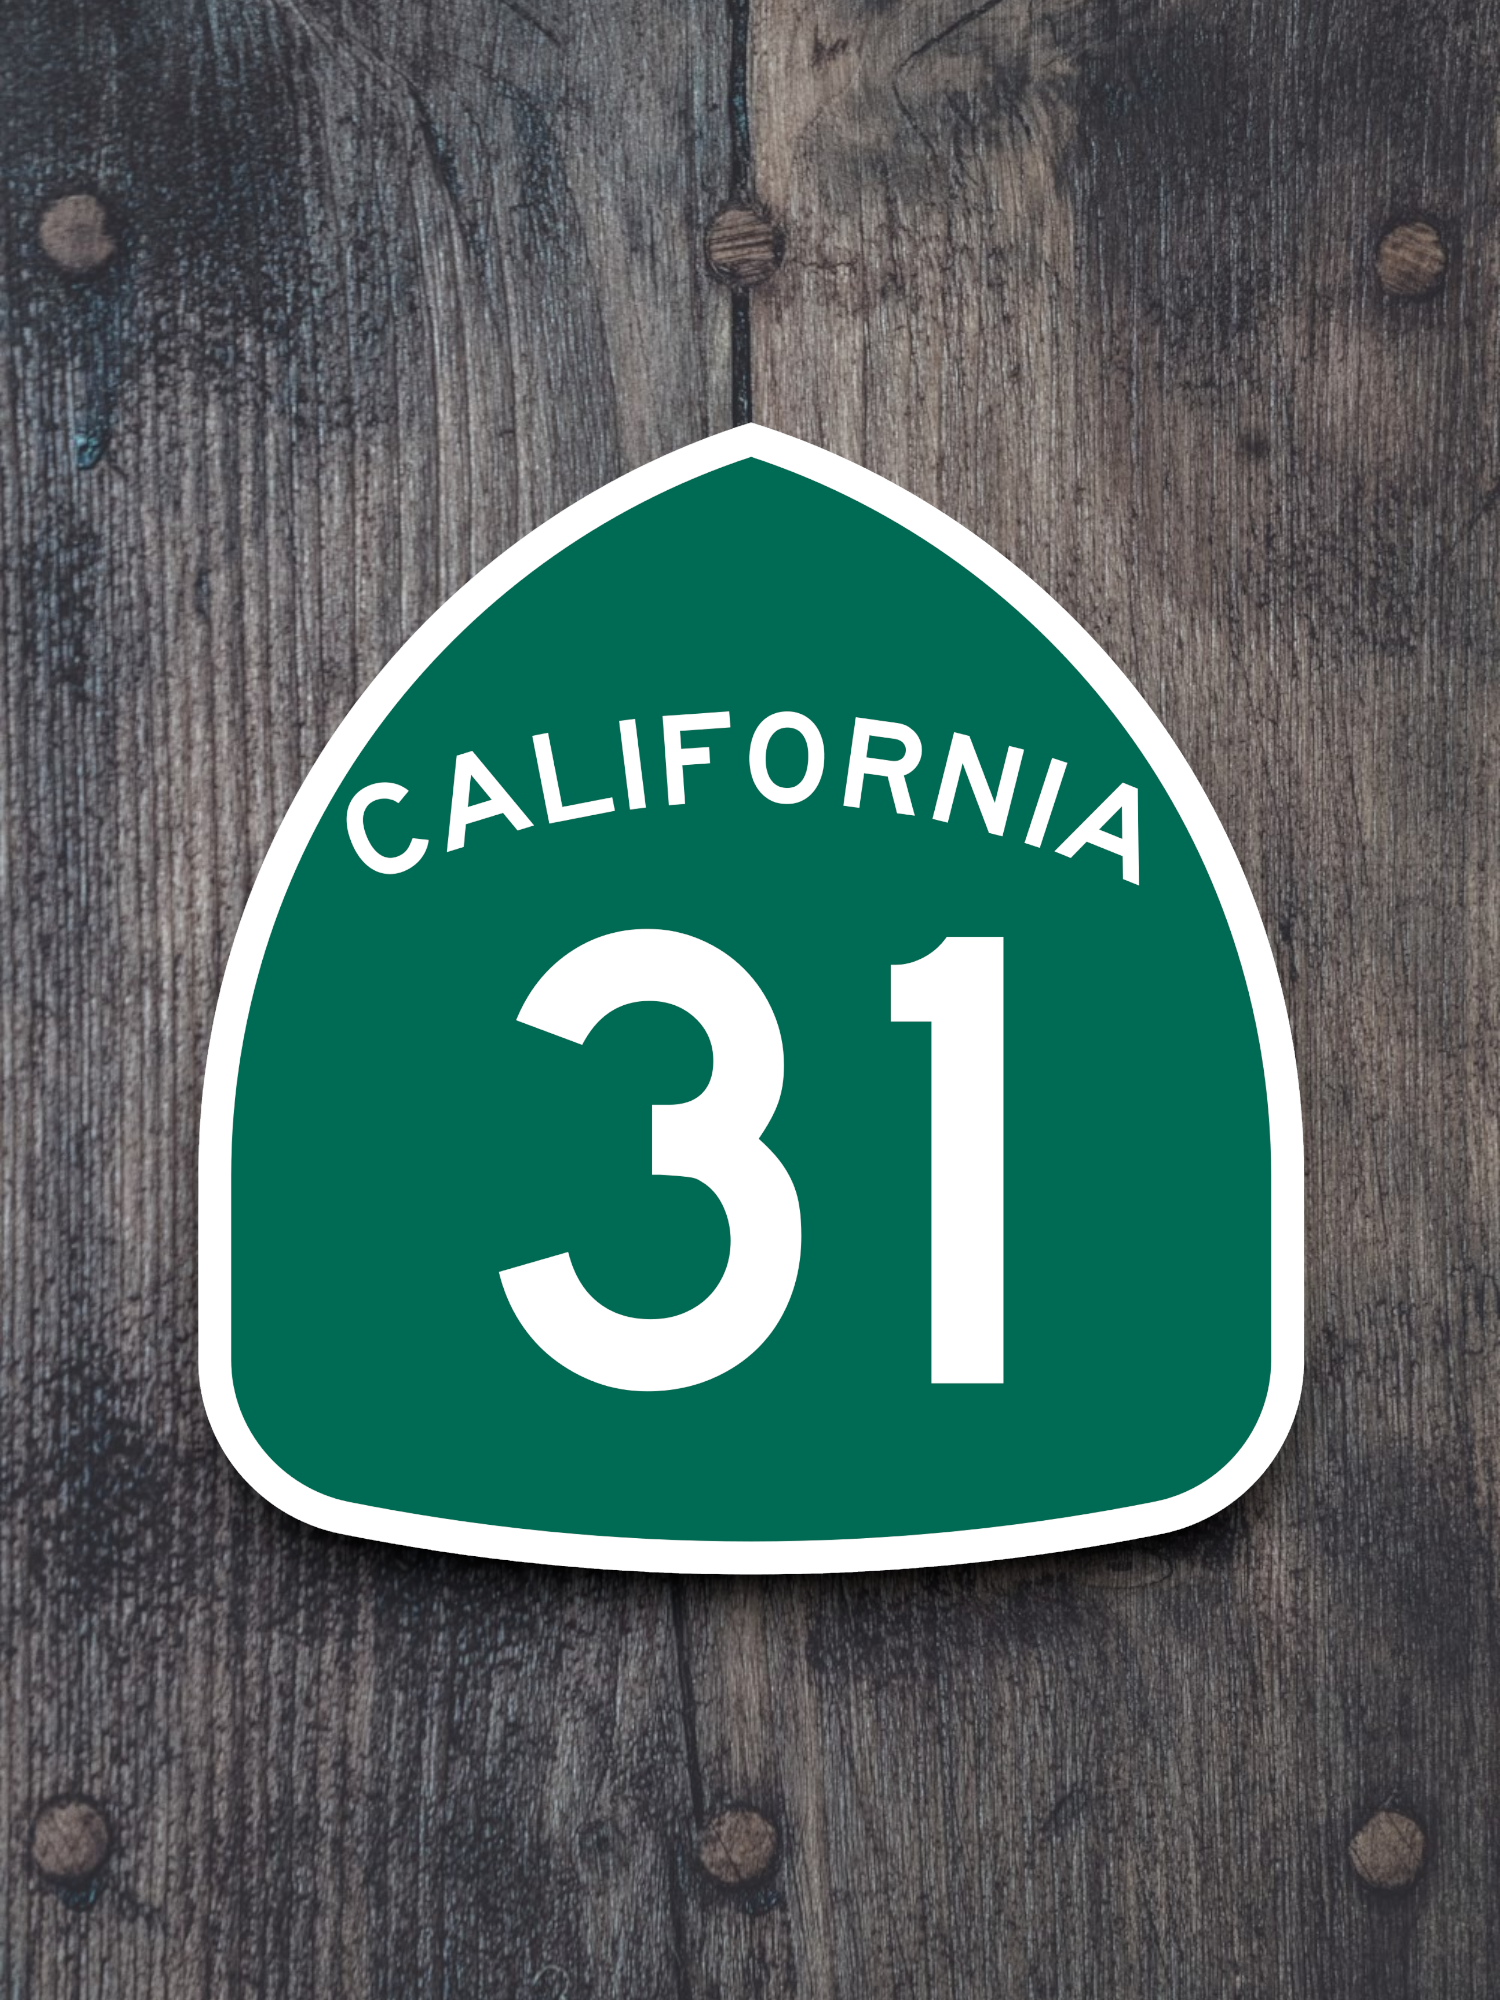 California State Route 31 Road Sign Sticker